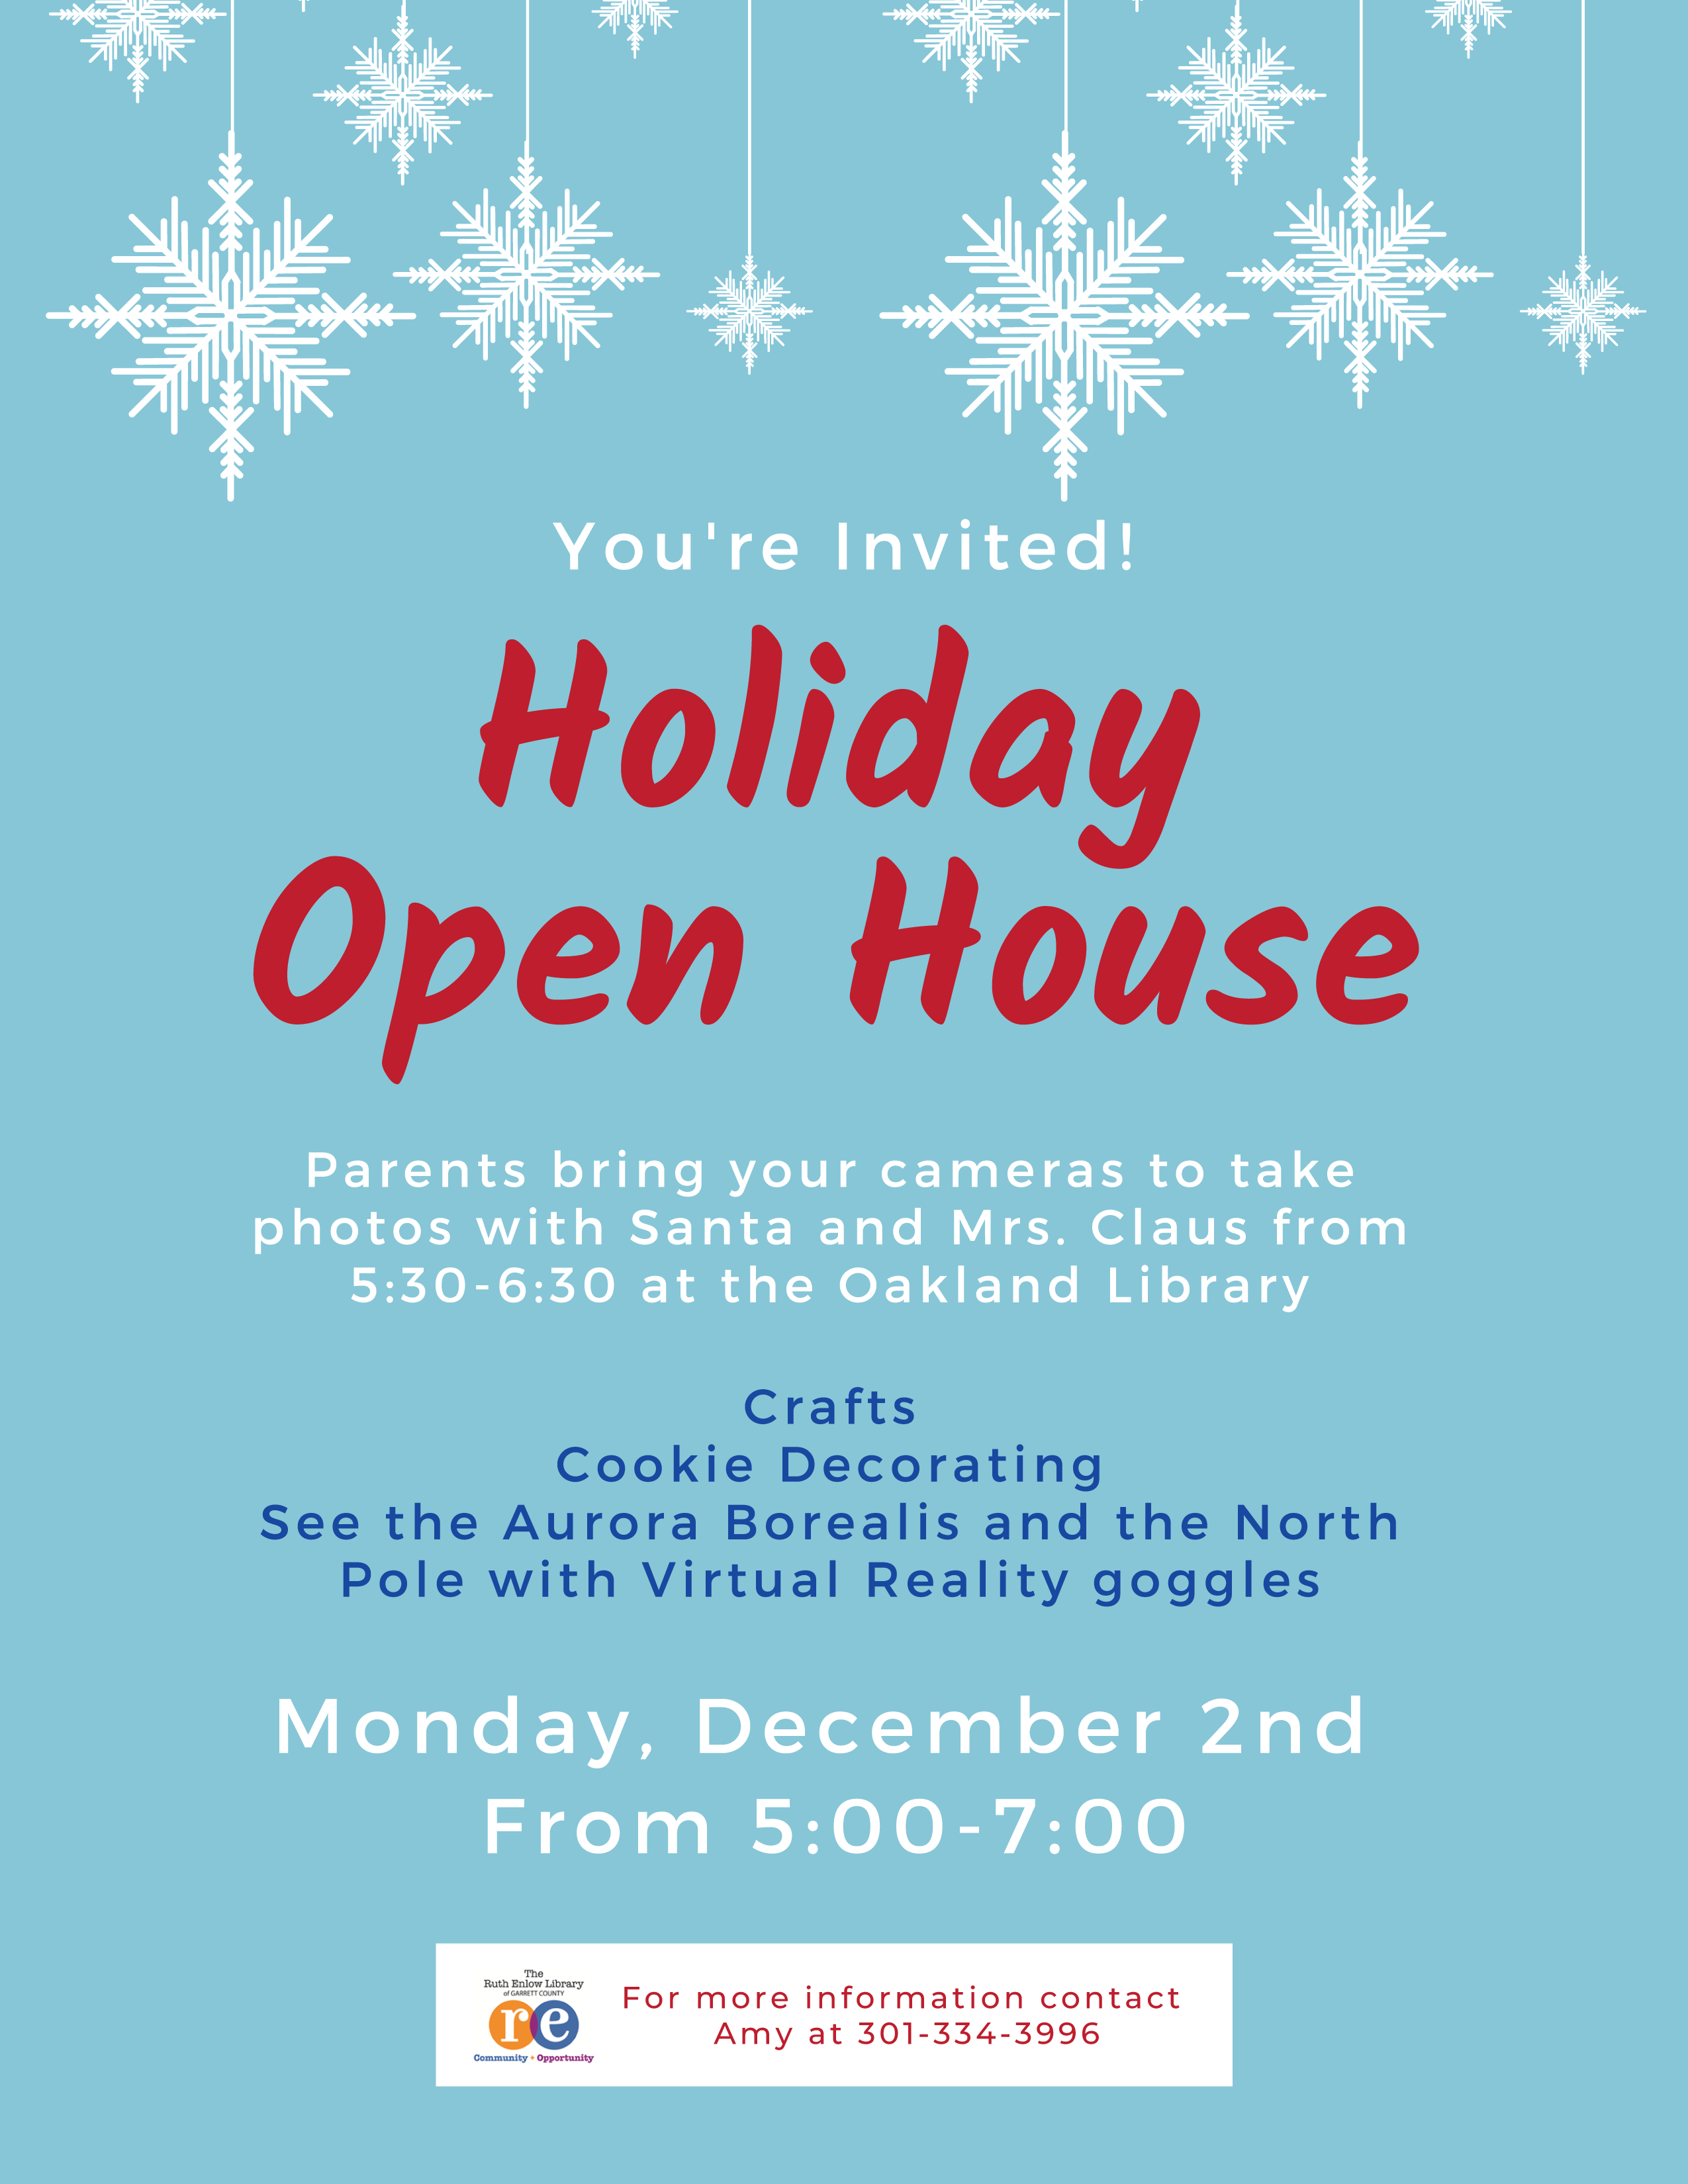 holiday open house oakland